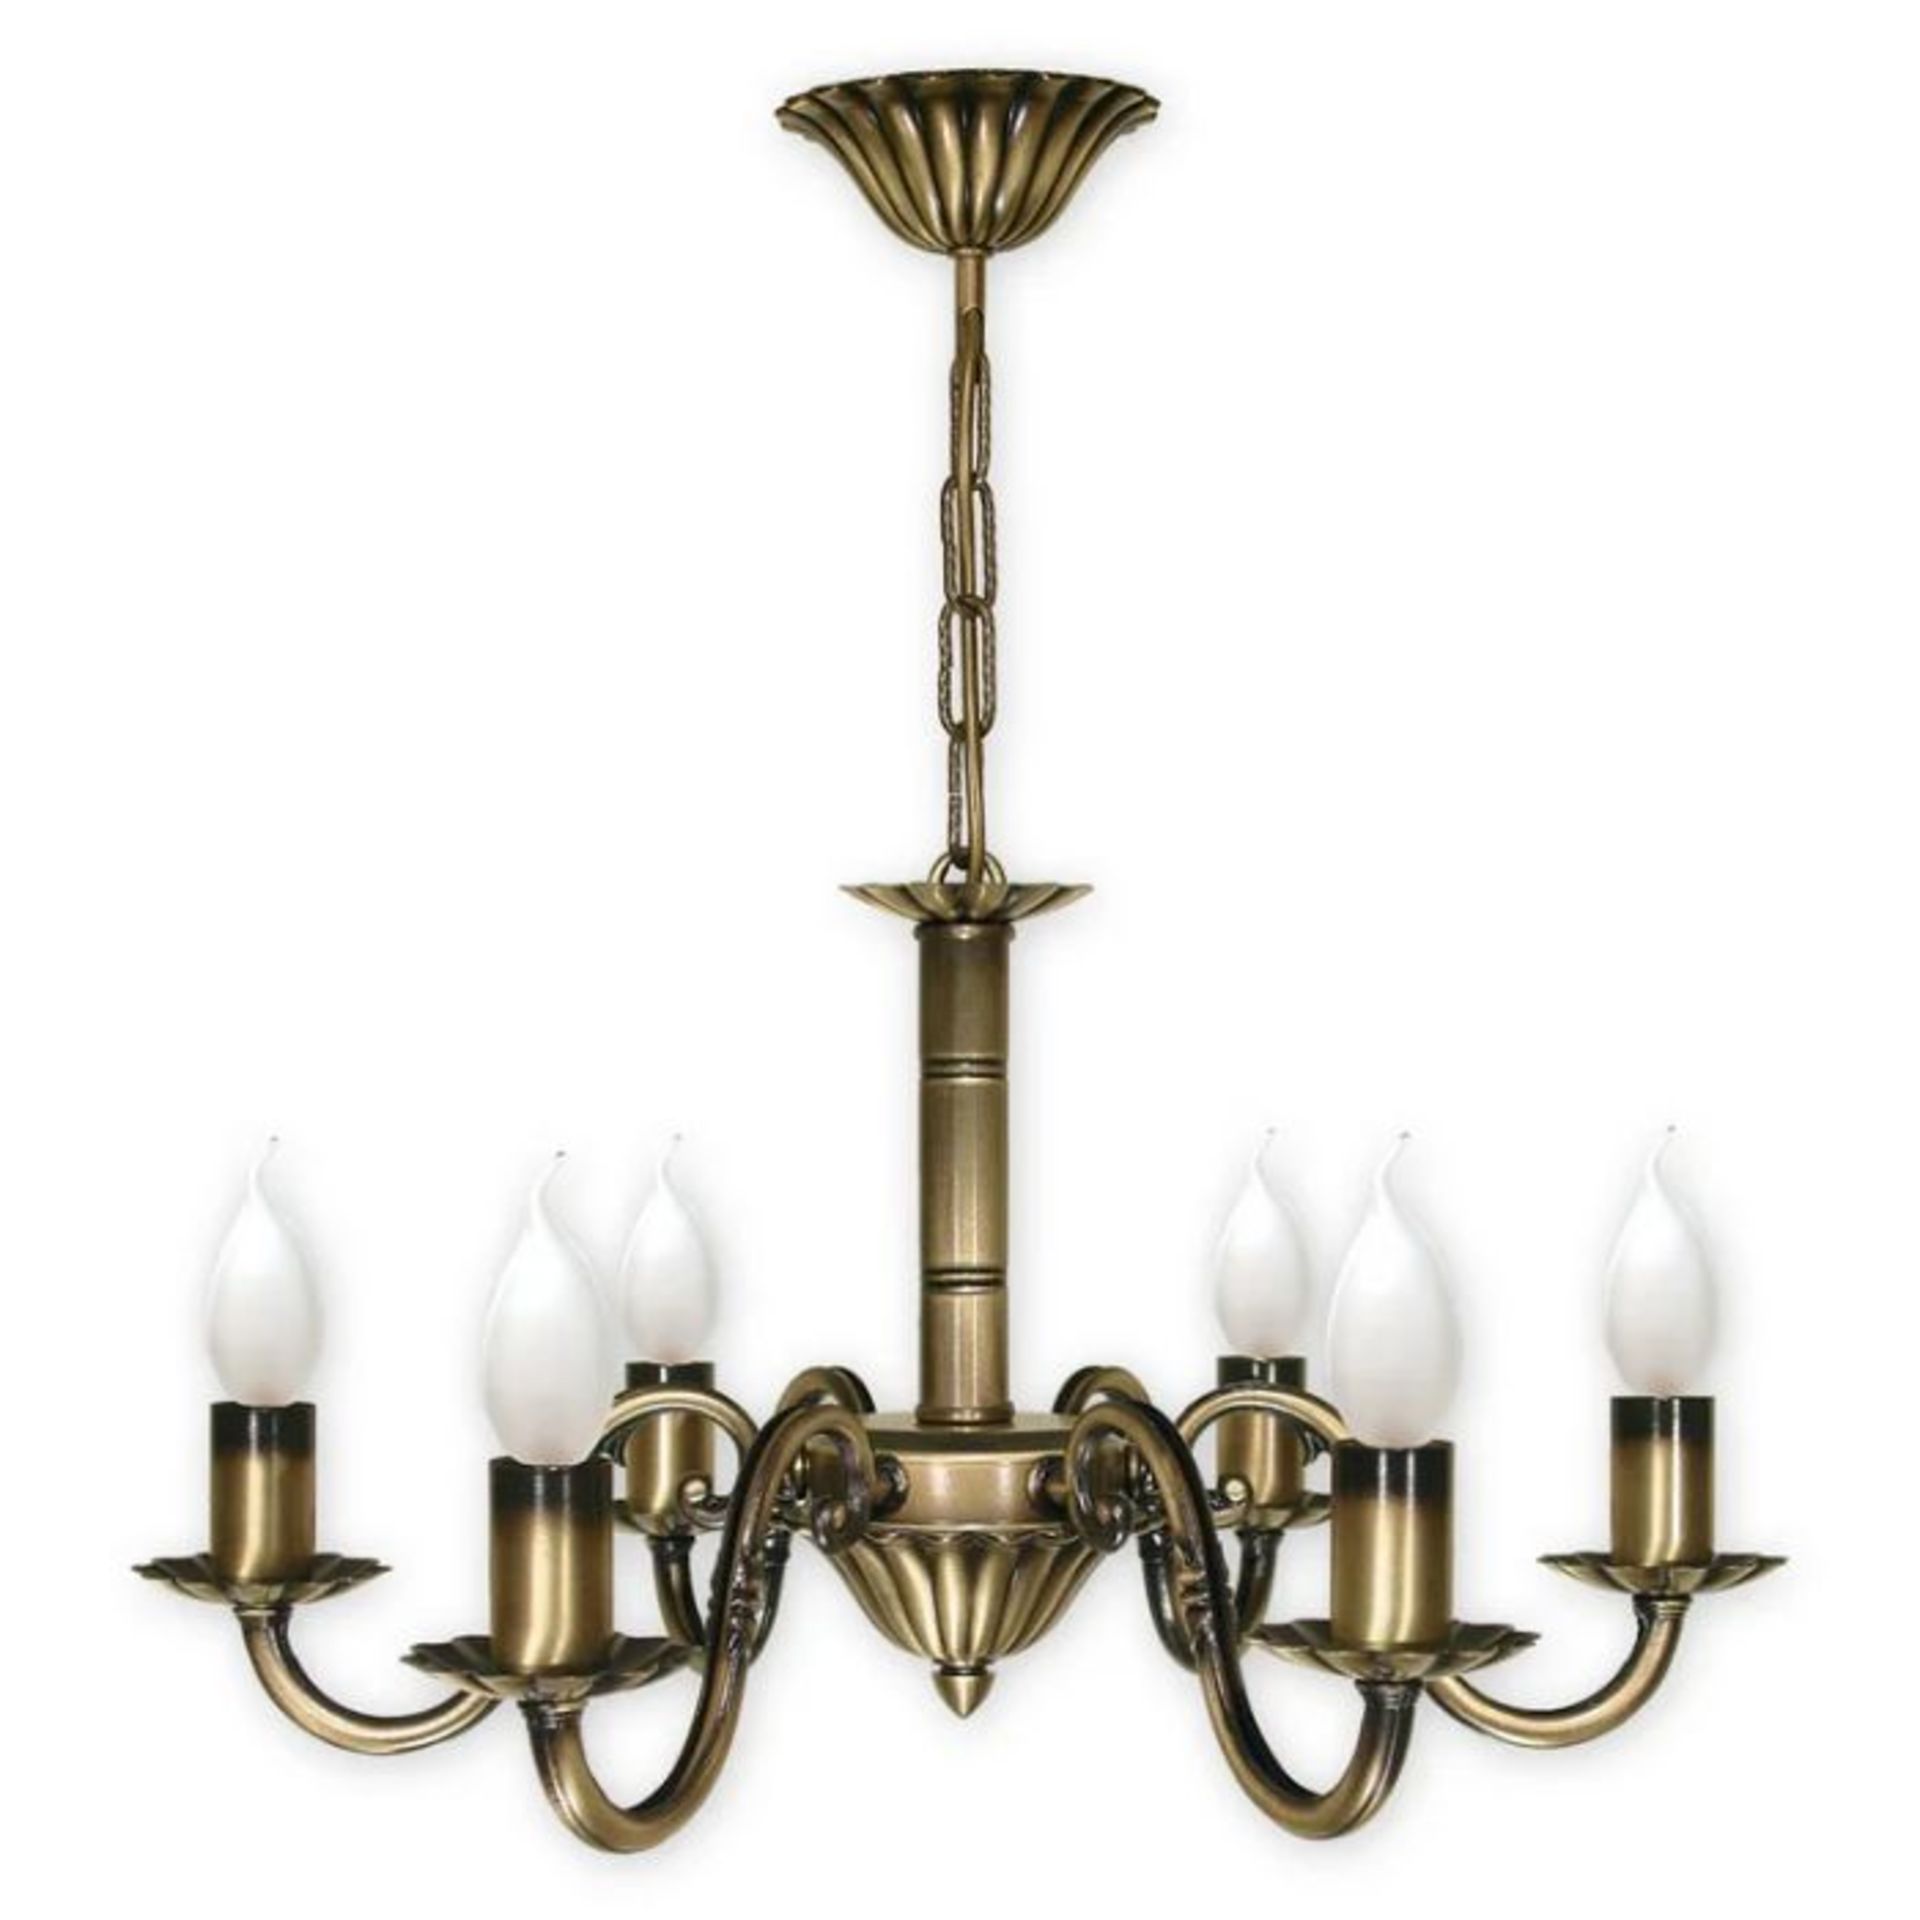 Astoria Grand, Dowless 6-Light Candle Style Chandelier (ANTIQUE BRASS FINISH) - RRP £139.99(JSDW1235